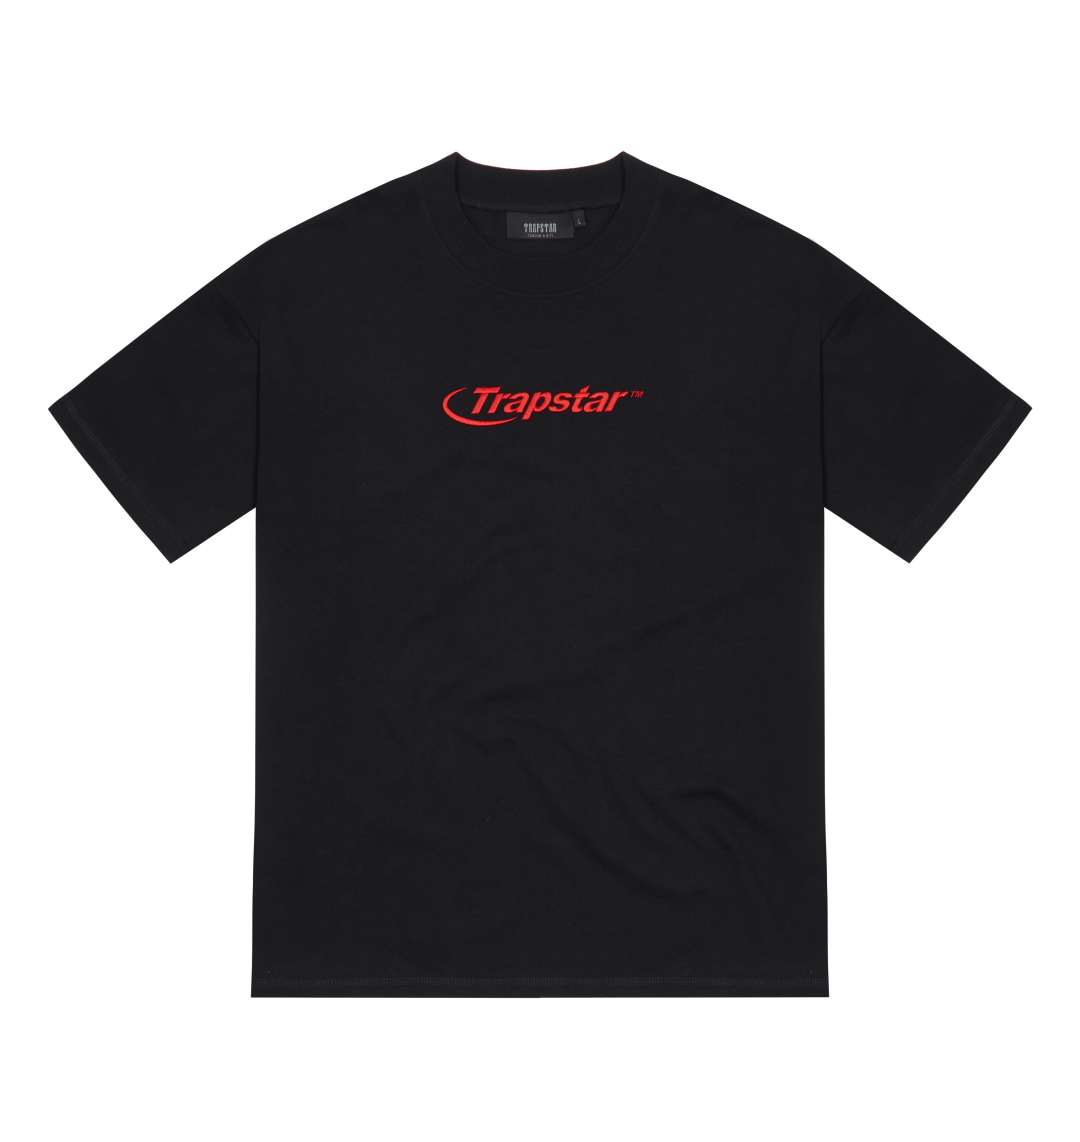 Trapstar London Hyperdrive Embroidered Tee - Black/Red - Trapstar 